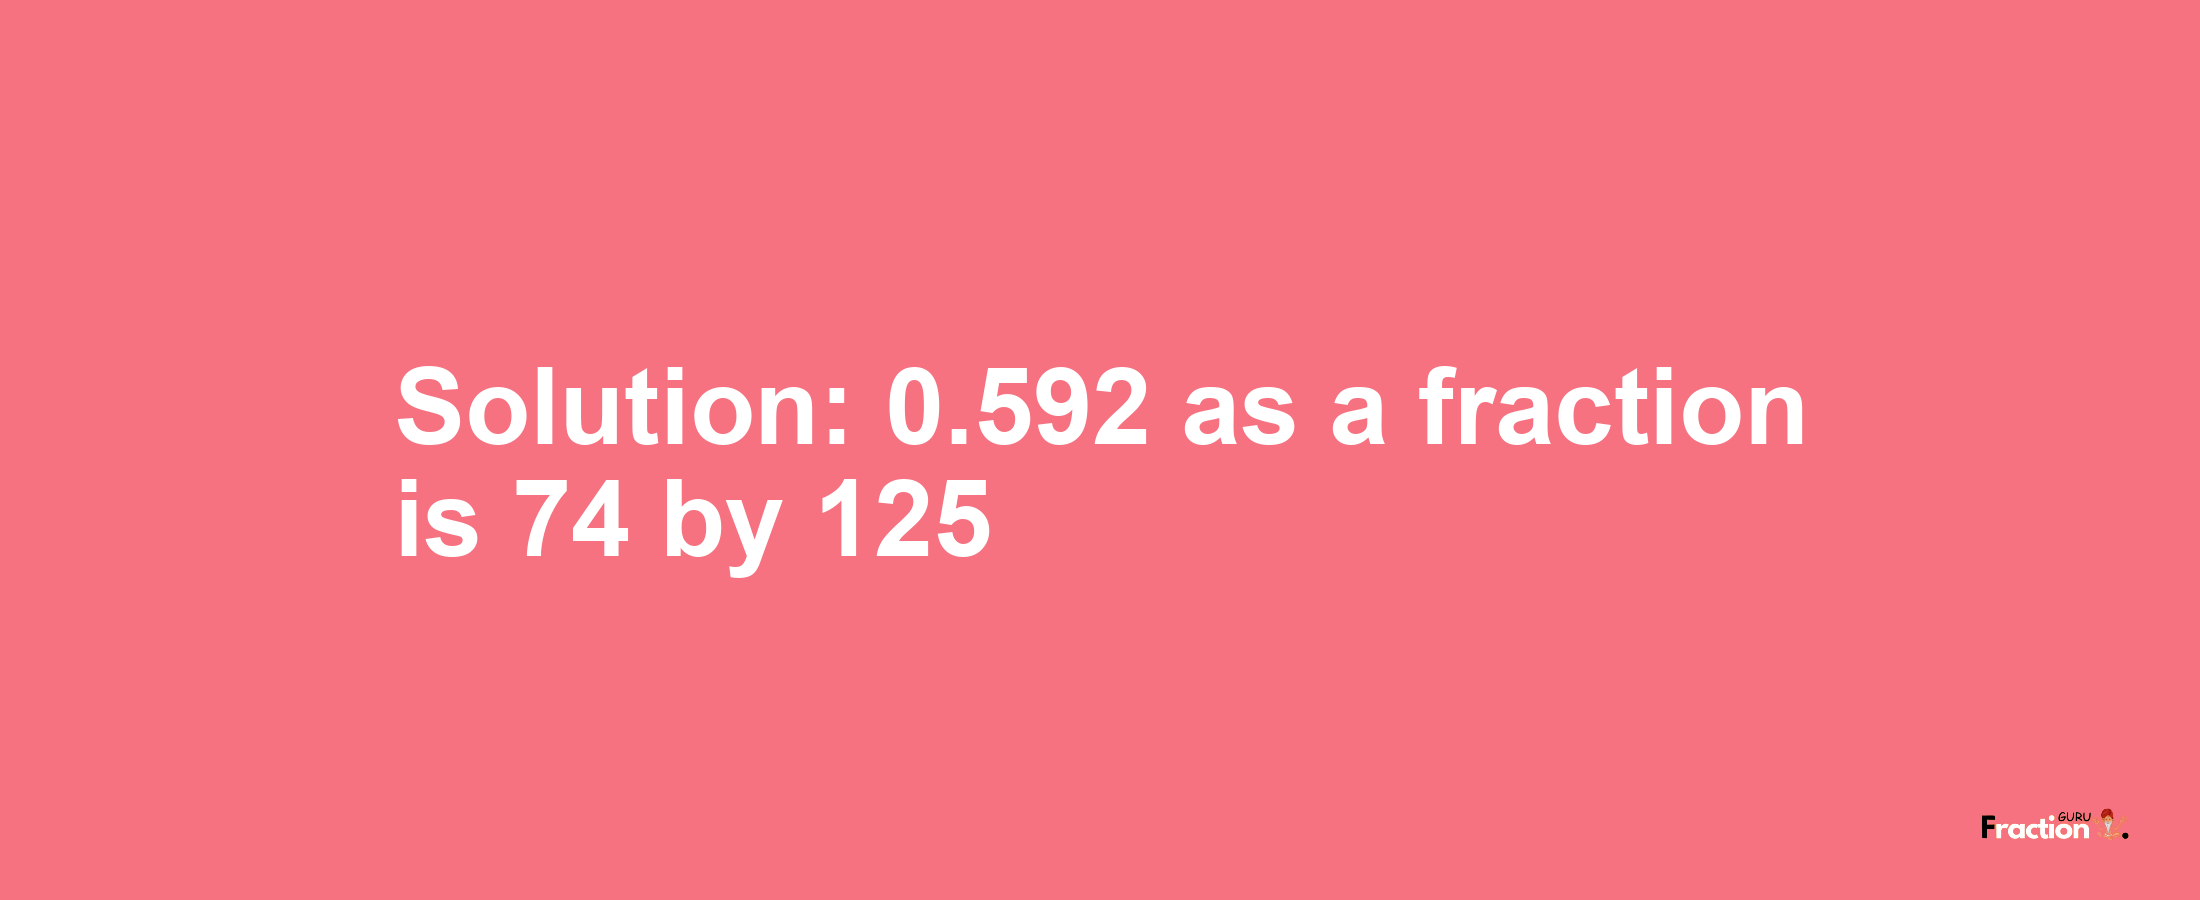 Solution:0.592 as a fraction is 74/125